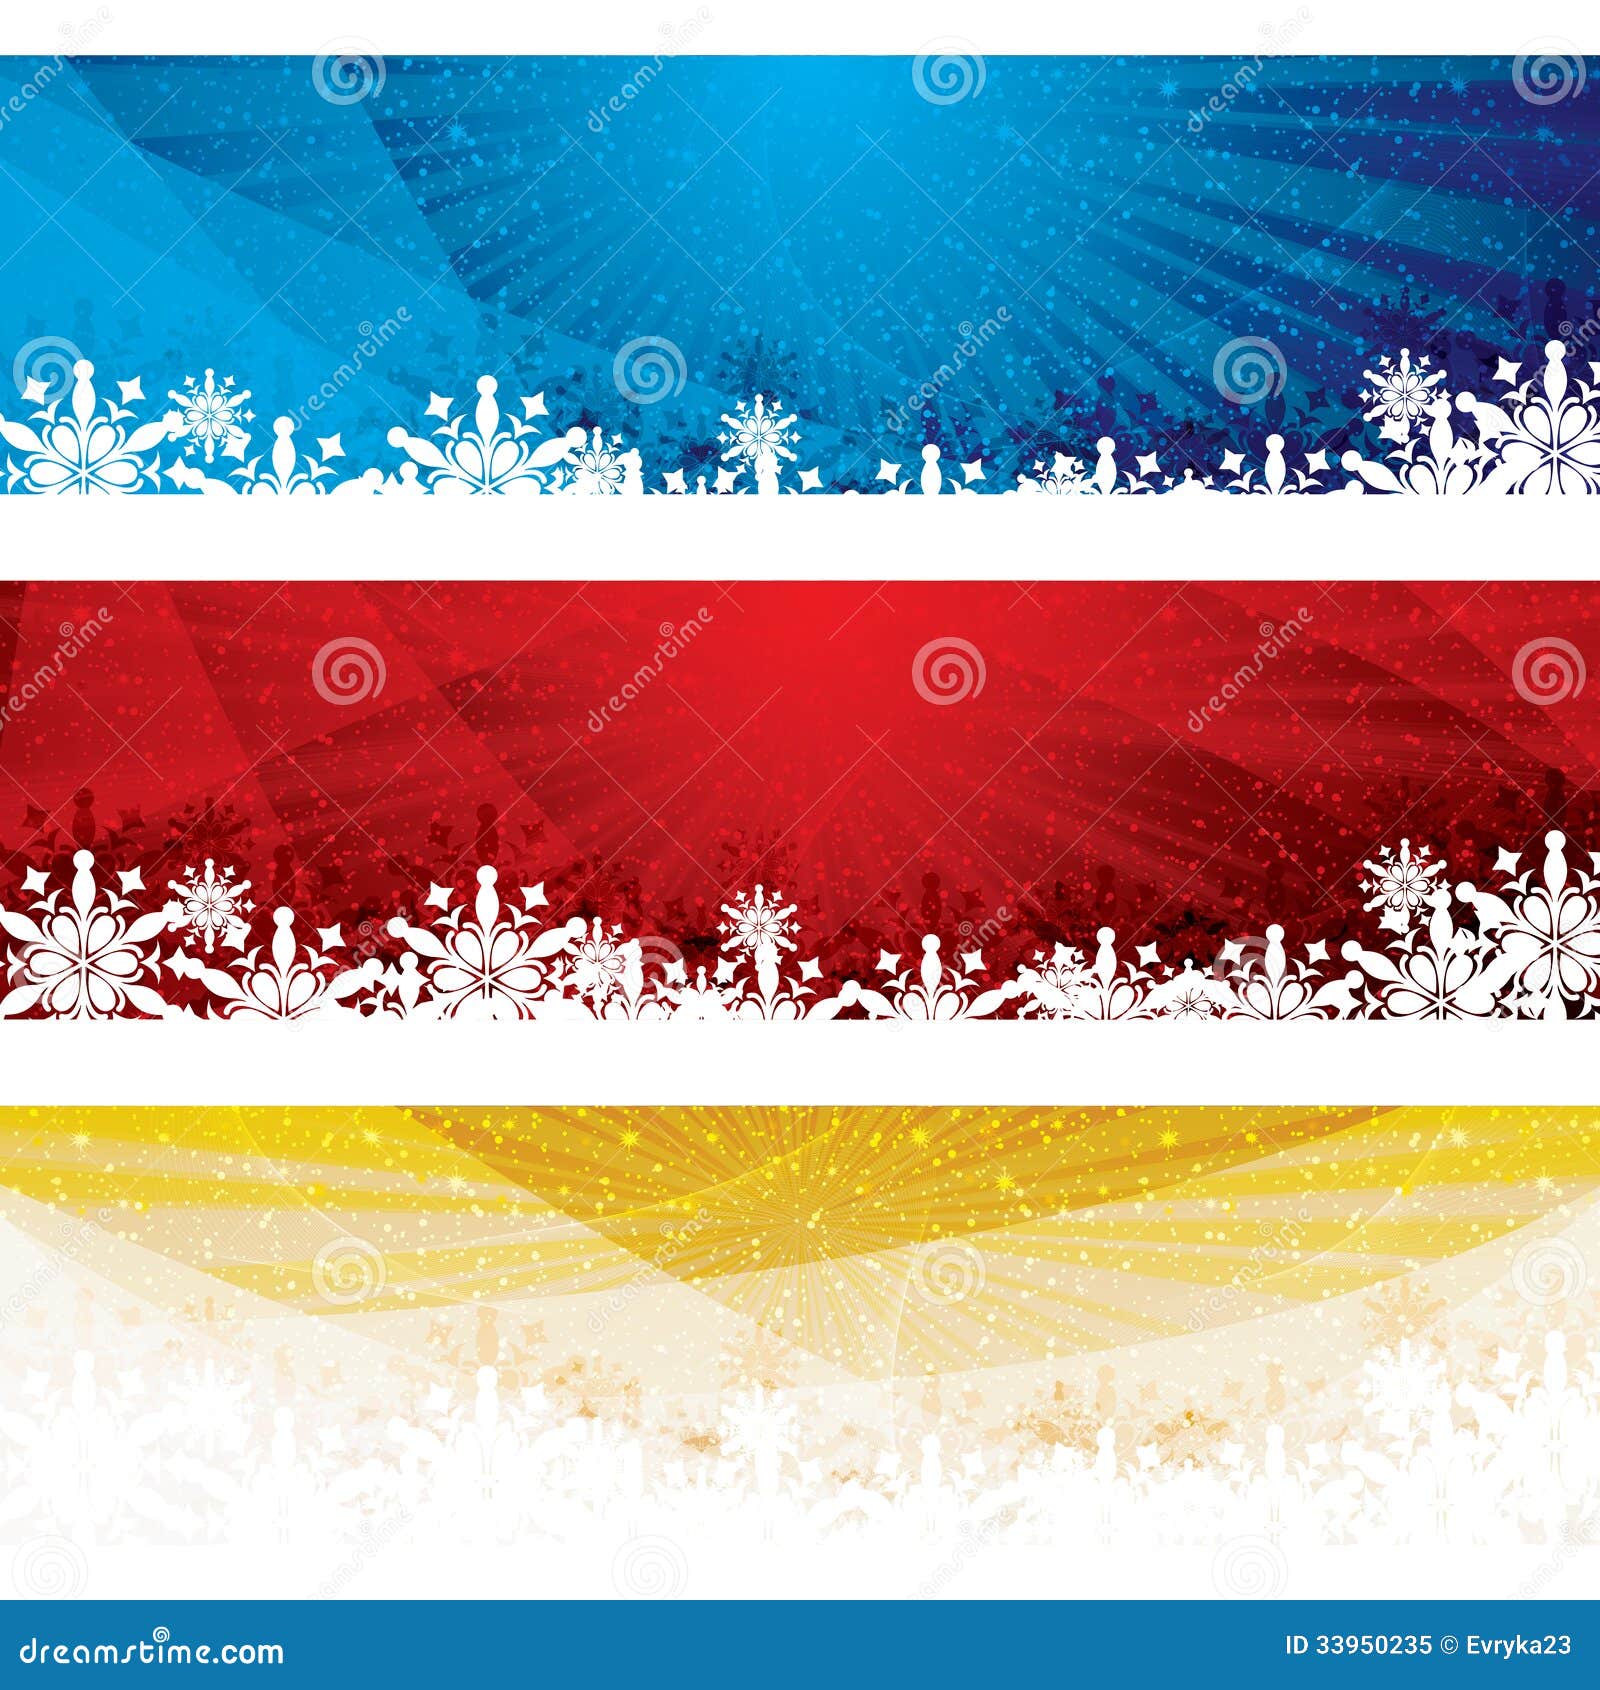 Abstract Winter Background Banner Royalty Free Stock Photo - Image ...